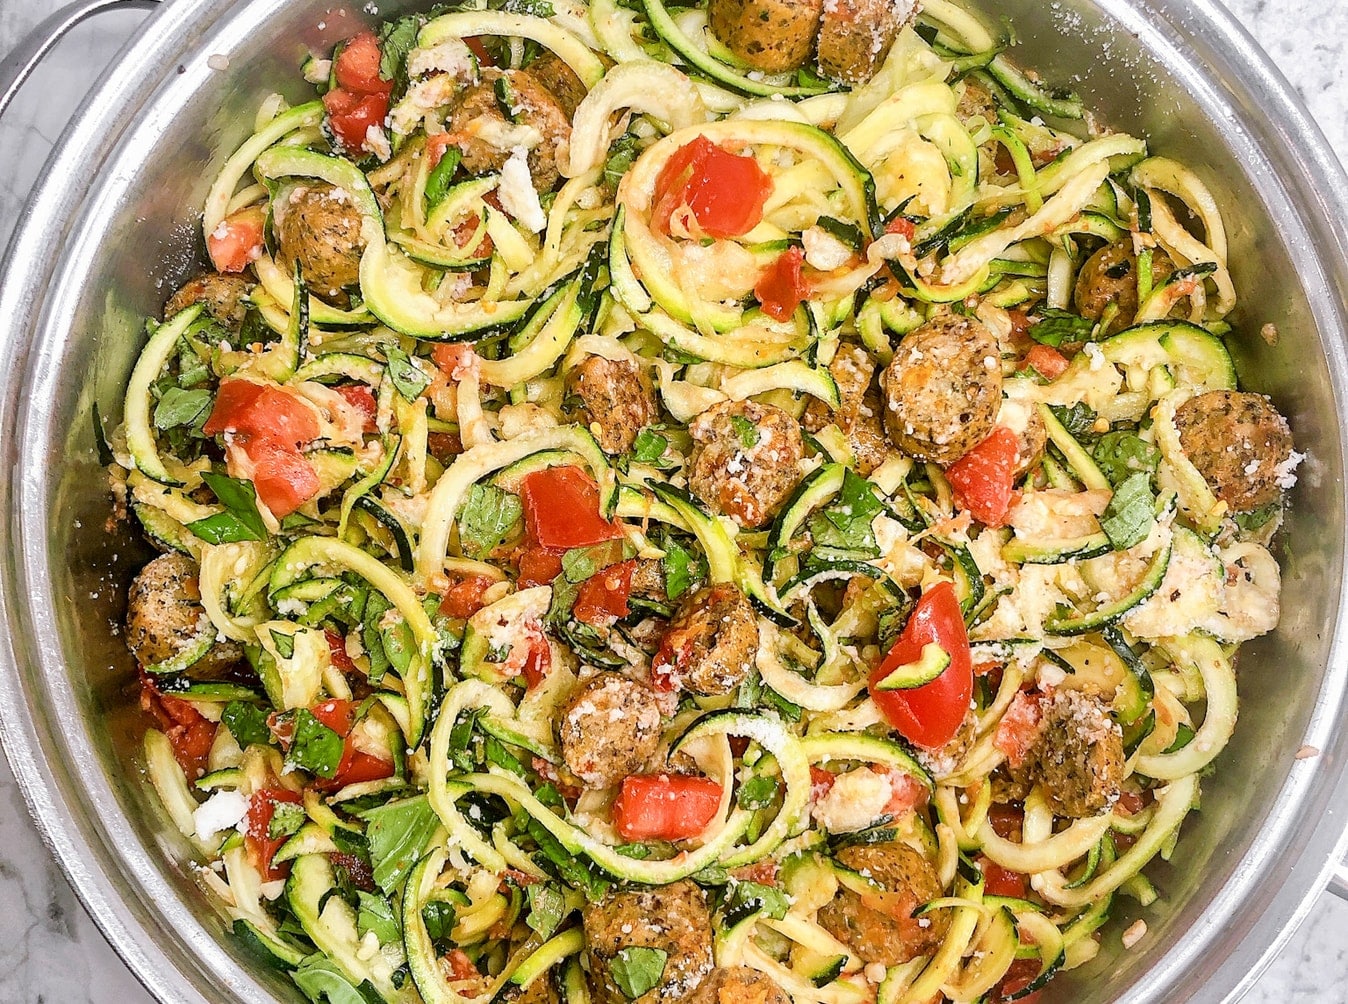 Zucchini Noodles with Chicken Sausage, Tomato, and Basil